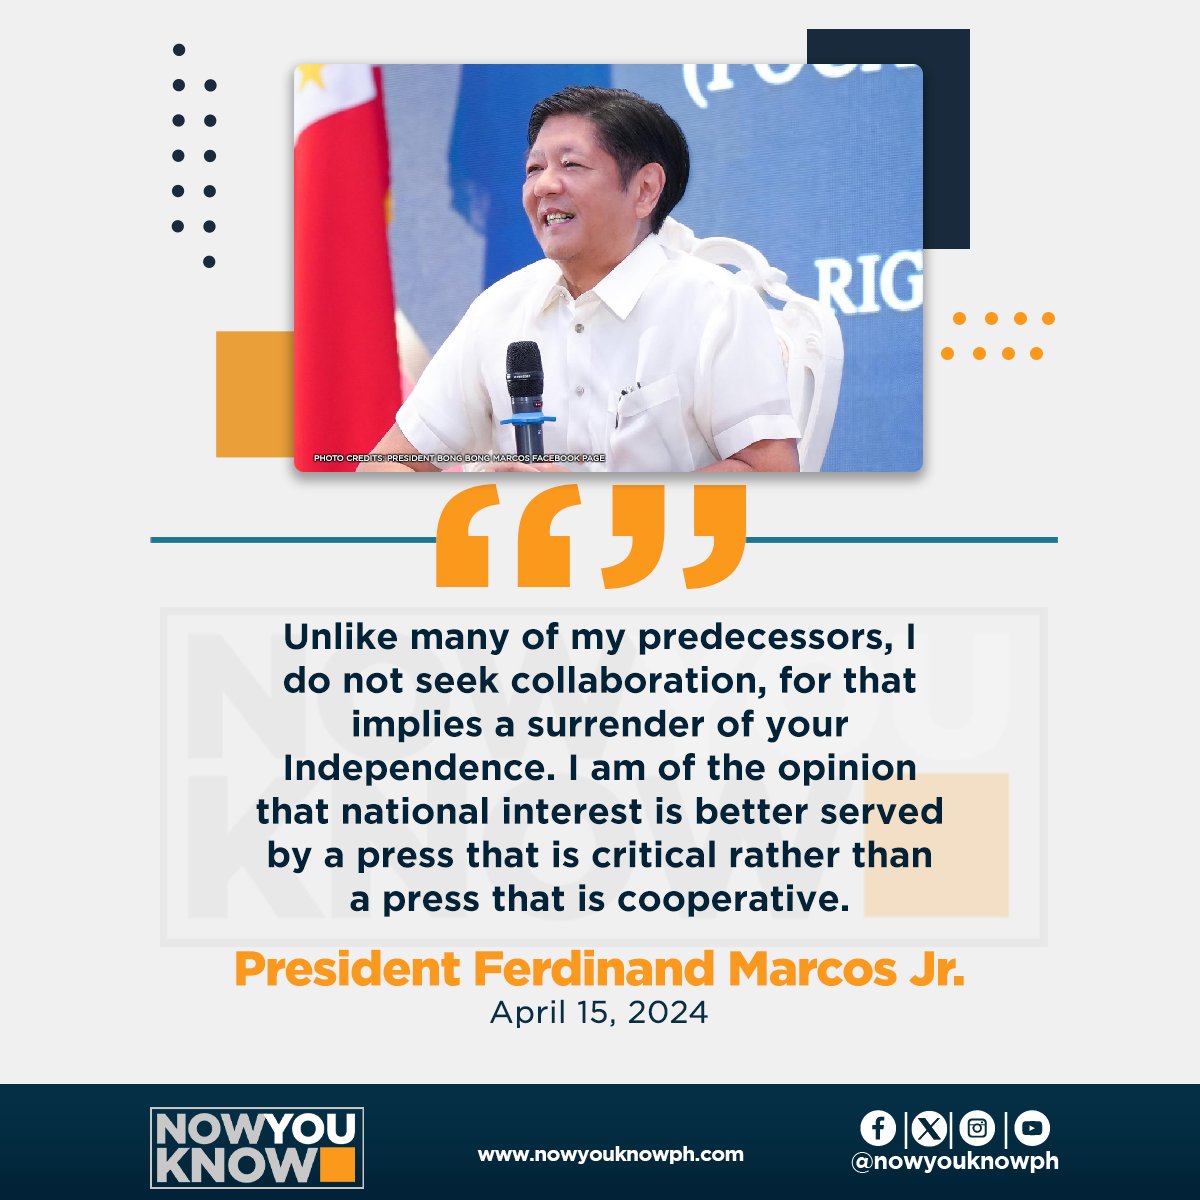 President Ferdinand “Bongbong” Marcos Jr. on Monday said the country needs a “critical” press, in contrast to his father’s rule when media crackdown was enforced. READ: bitly.ws/3i5sU 📰Inquirer.net